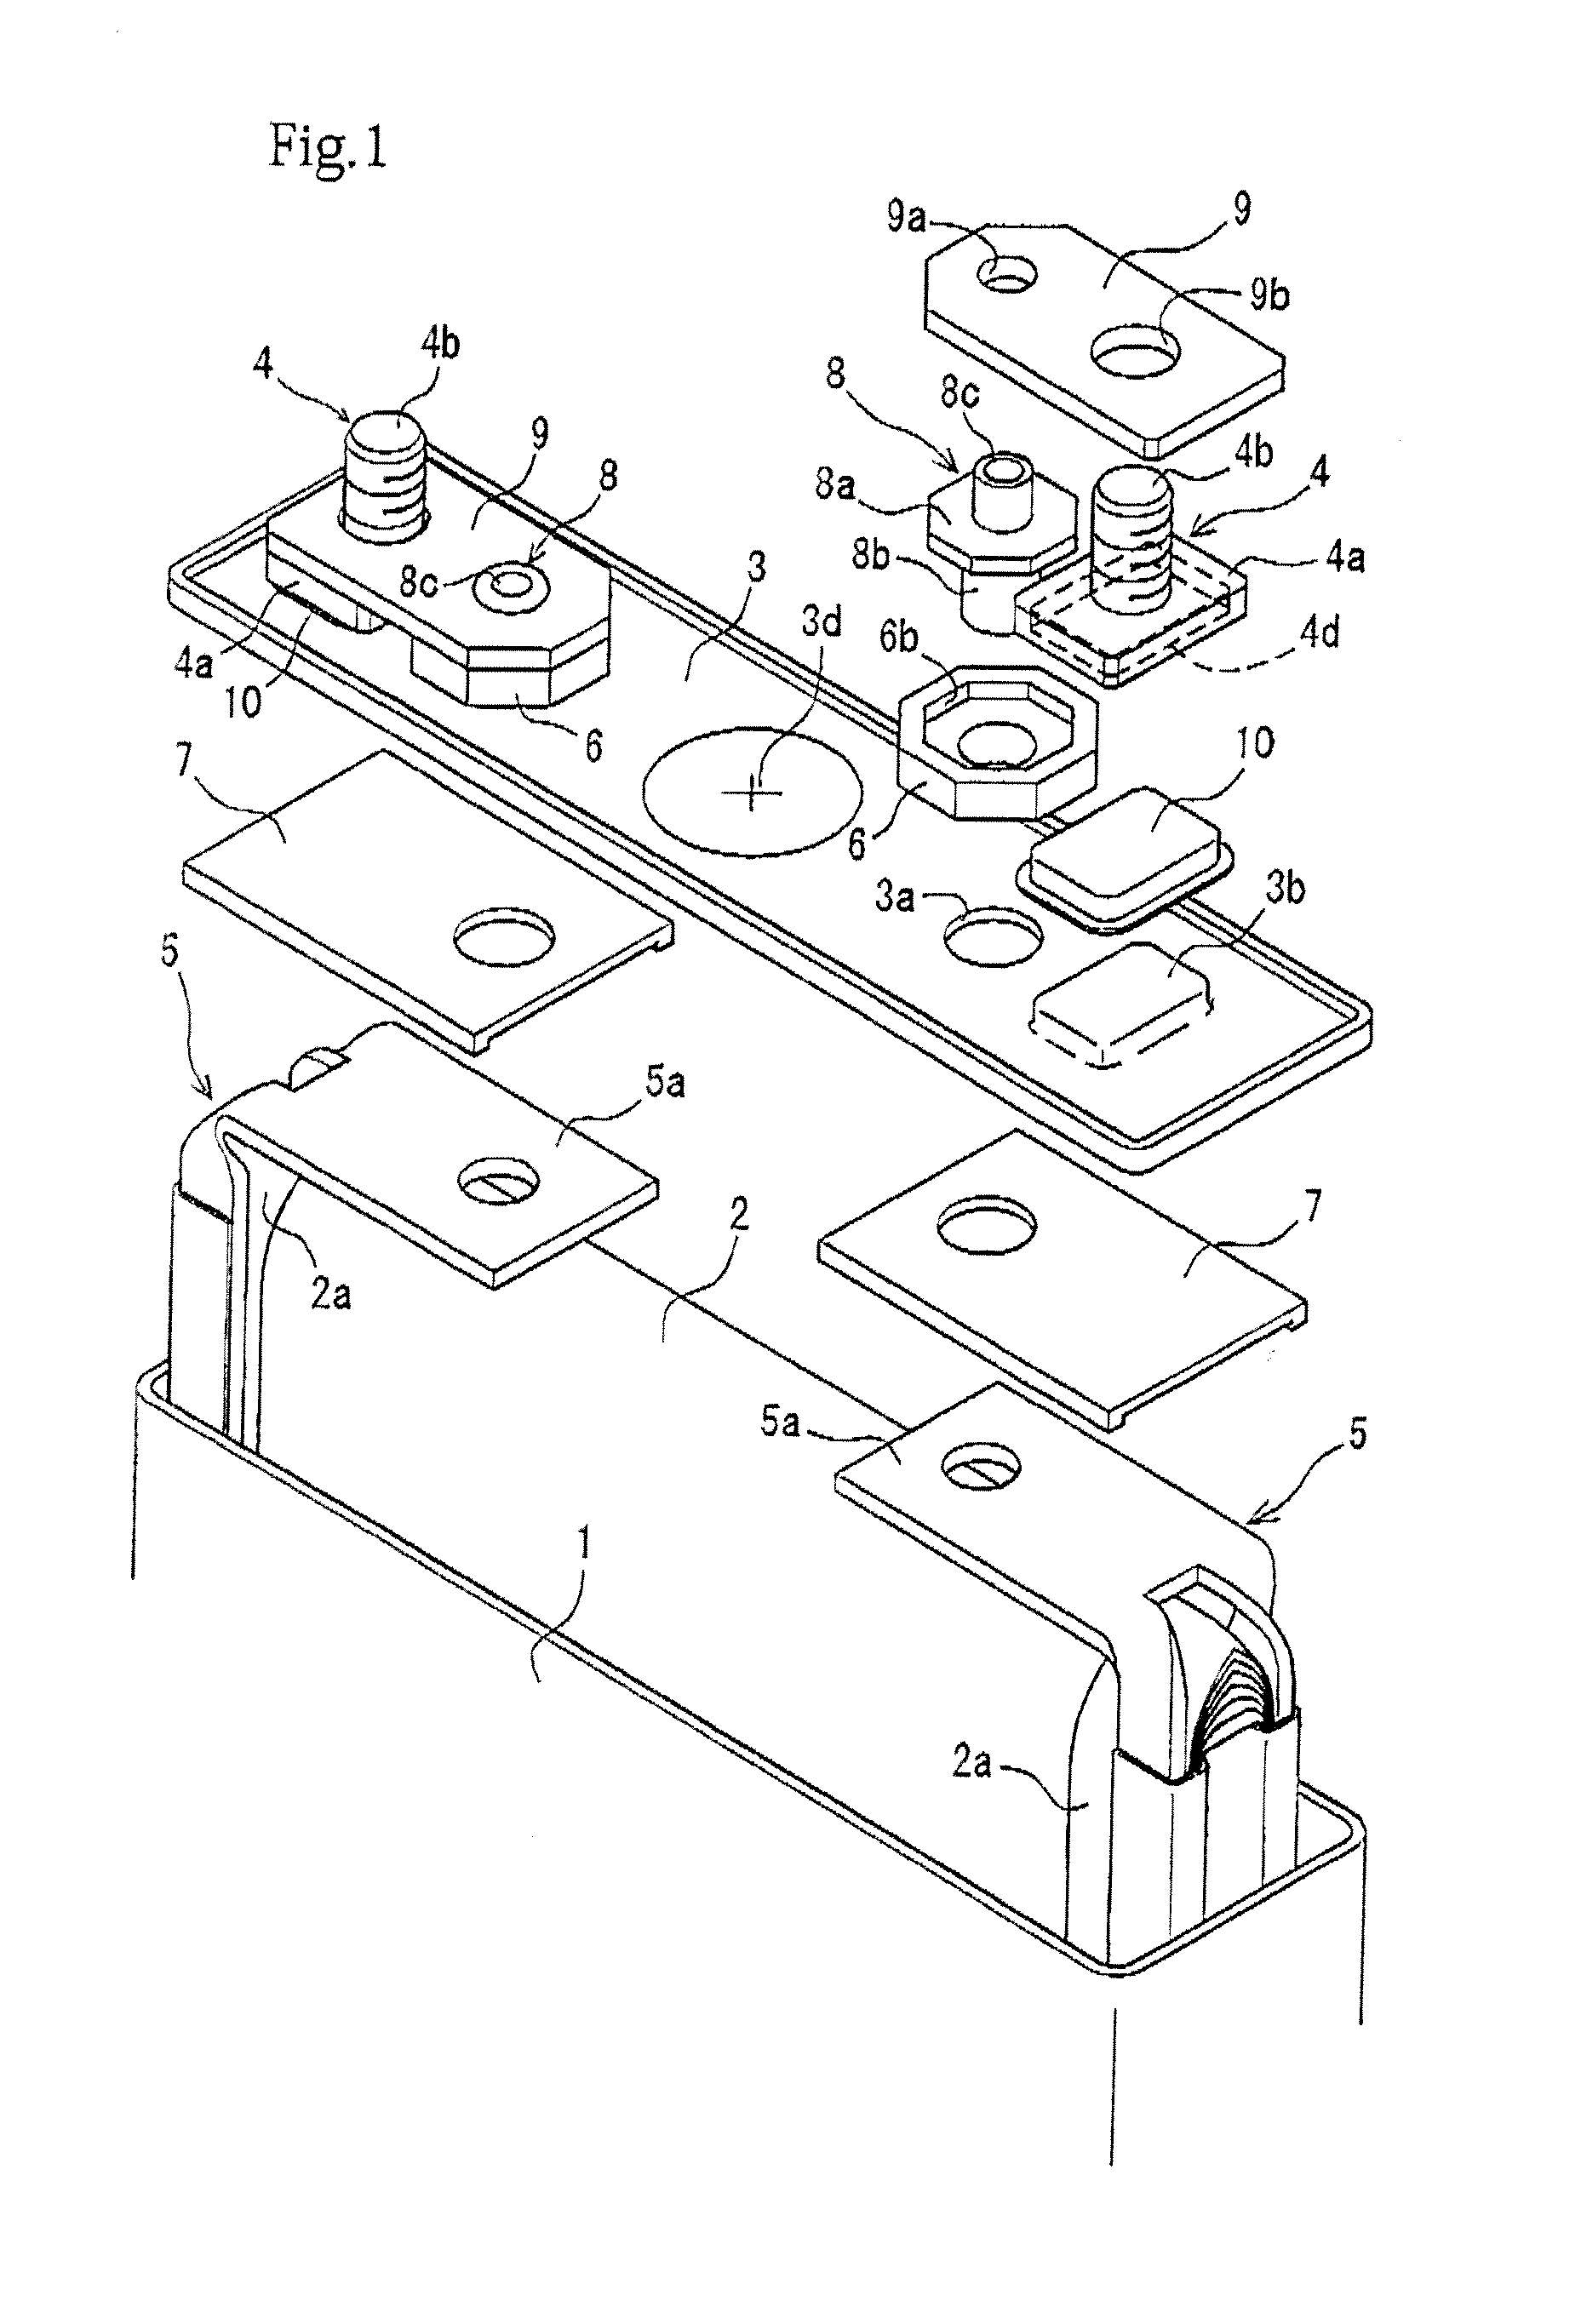 Battery and method of manufacturing the same